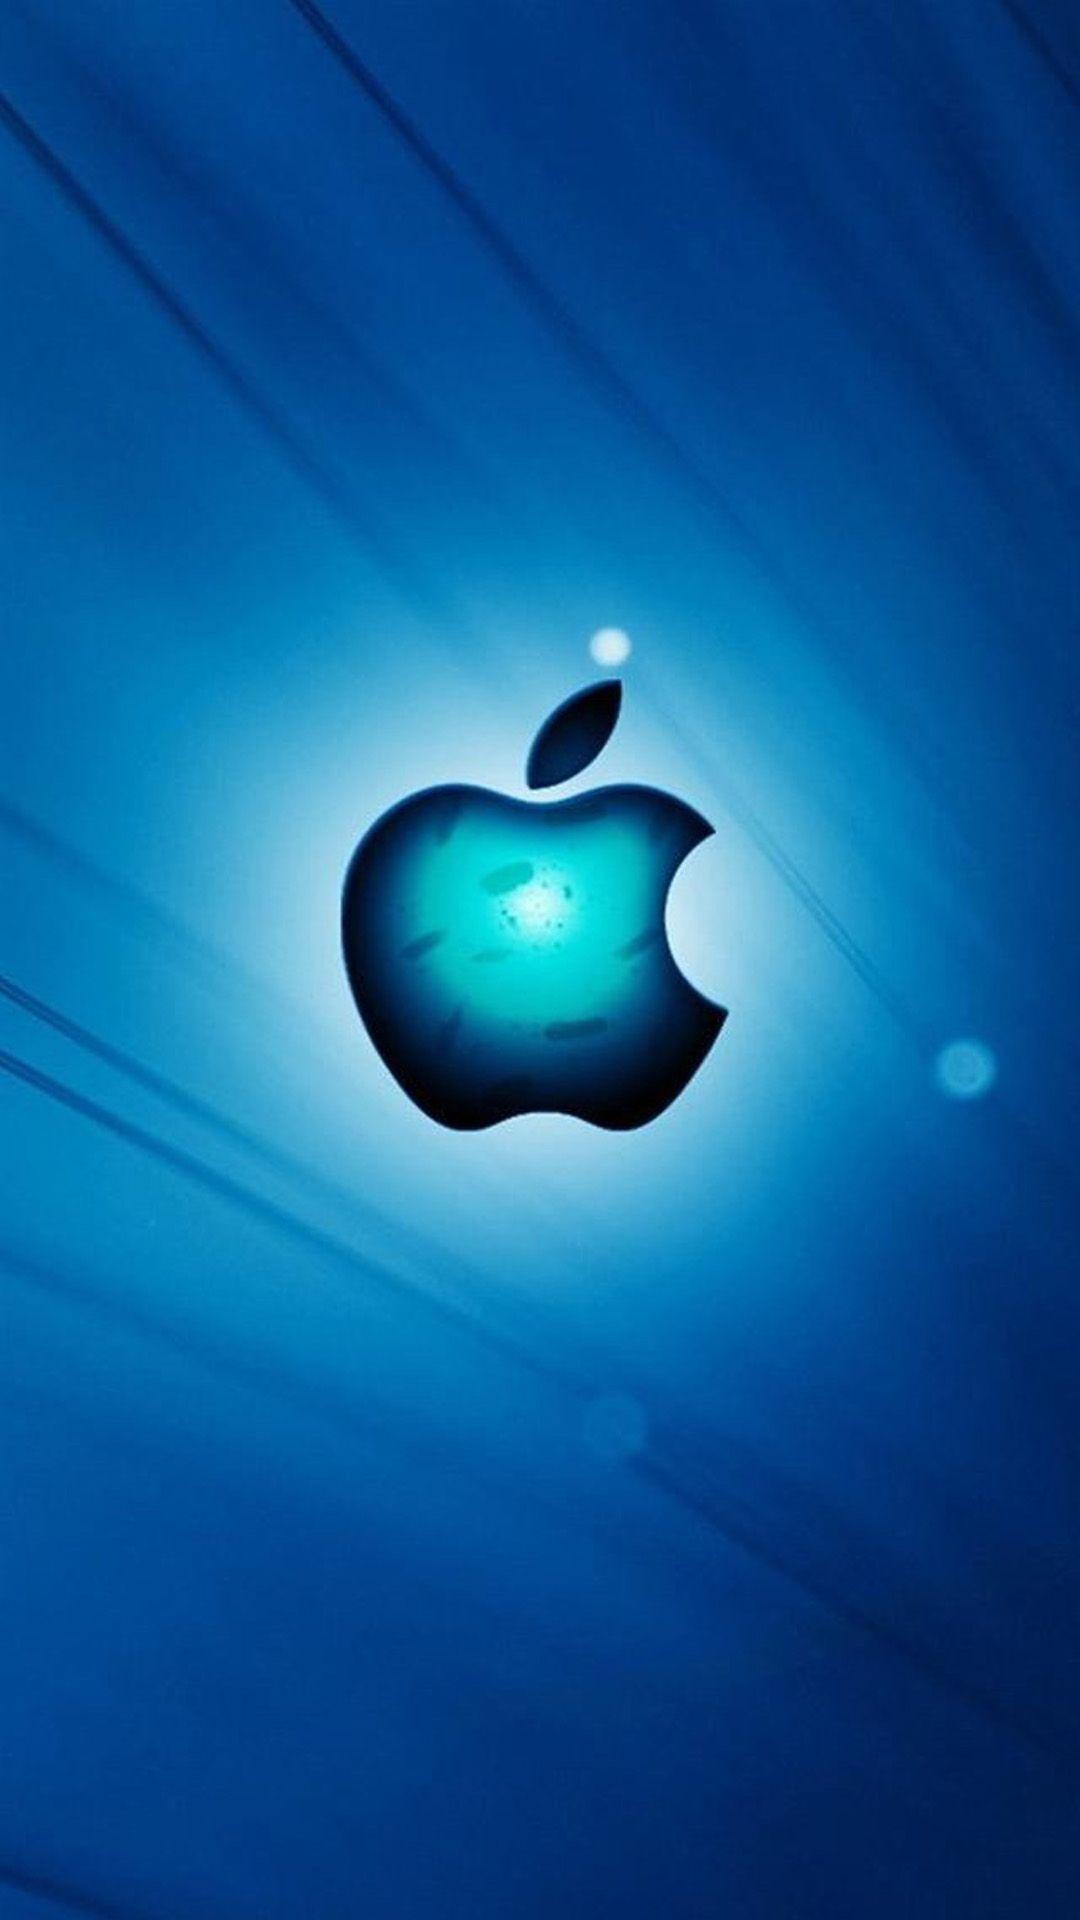 Apple Wallpaper Hd 1080p Download For Mobile